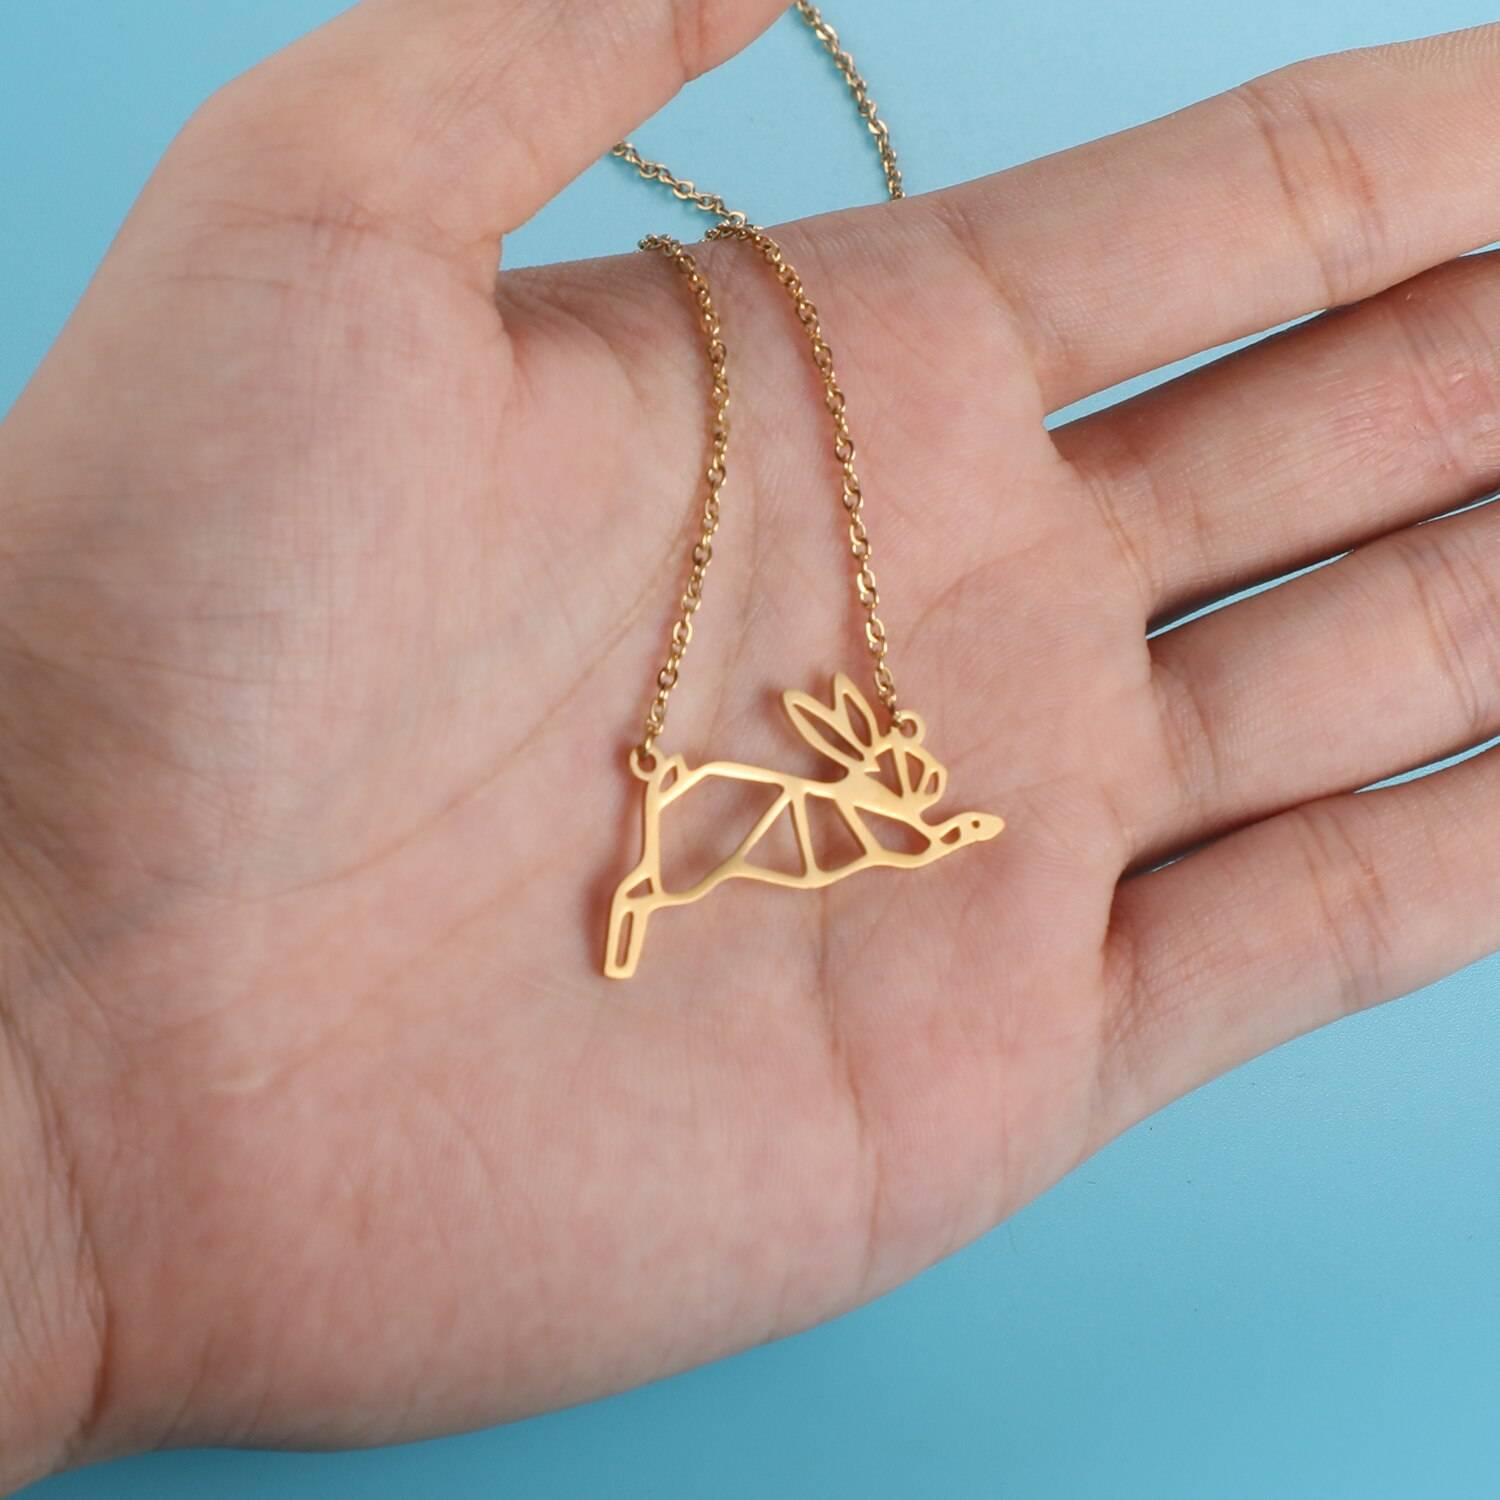 Leaping Hare Origami Necklace in hand